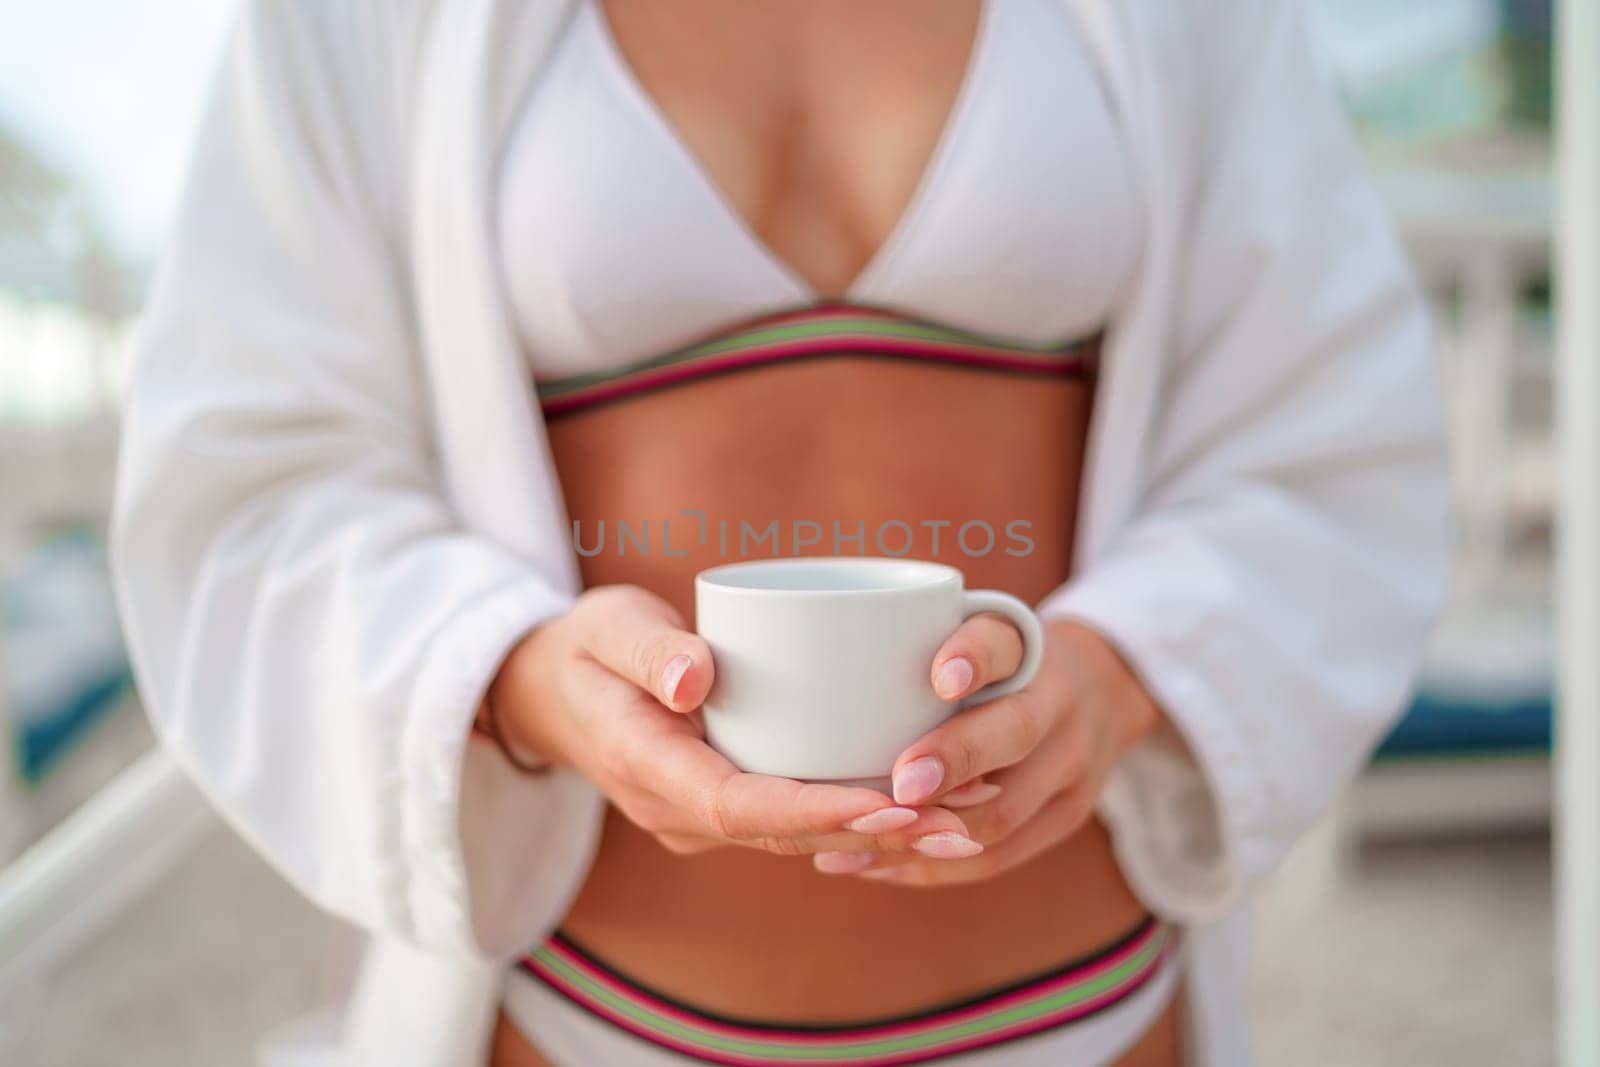 A white cup for coffee in the hands of woman in a bathing suit and a white bathrobe.